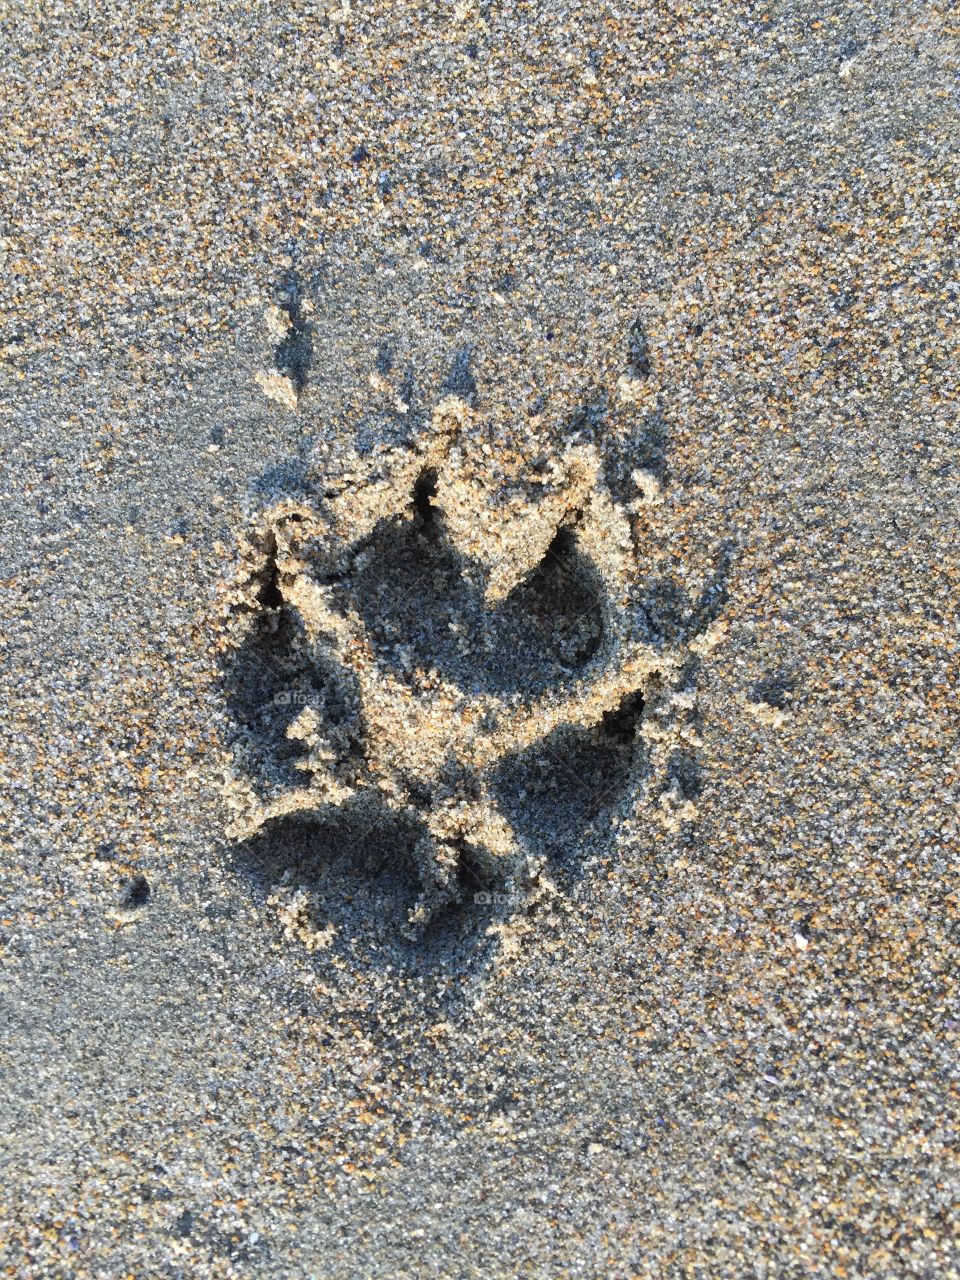 Paw print in the sand. 